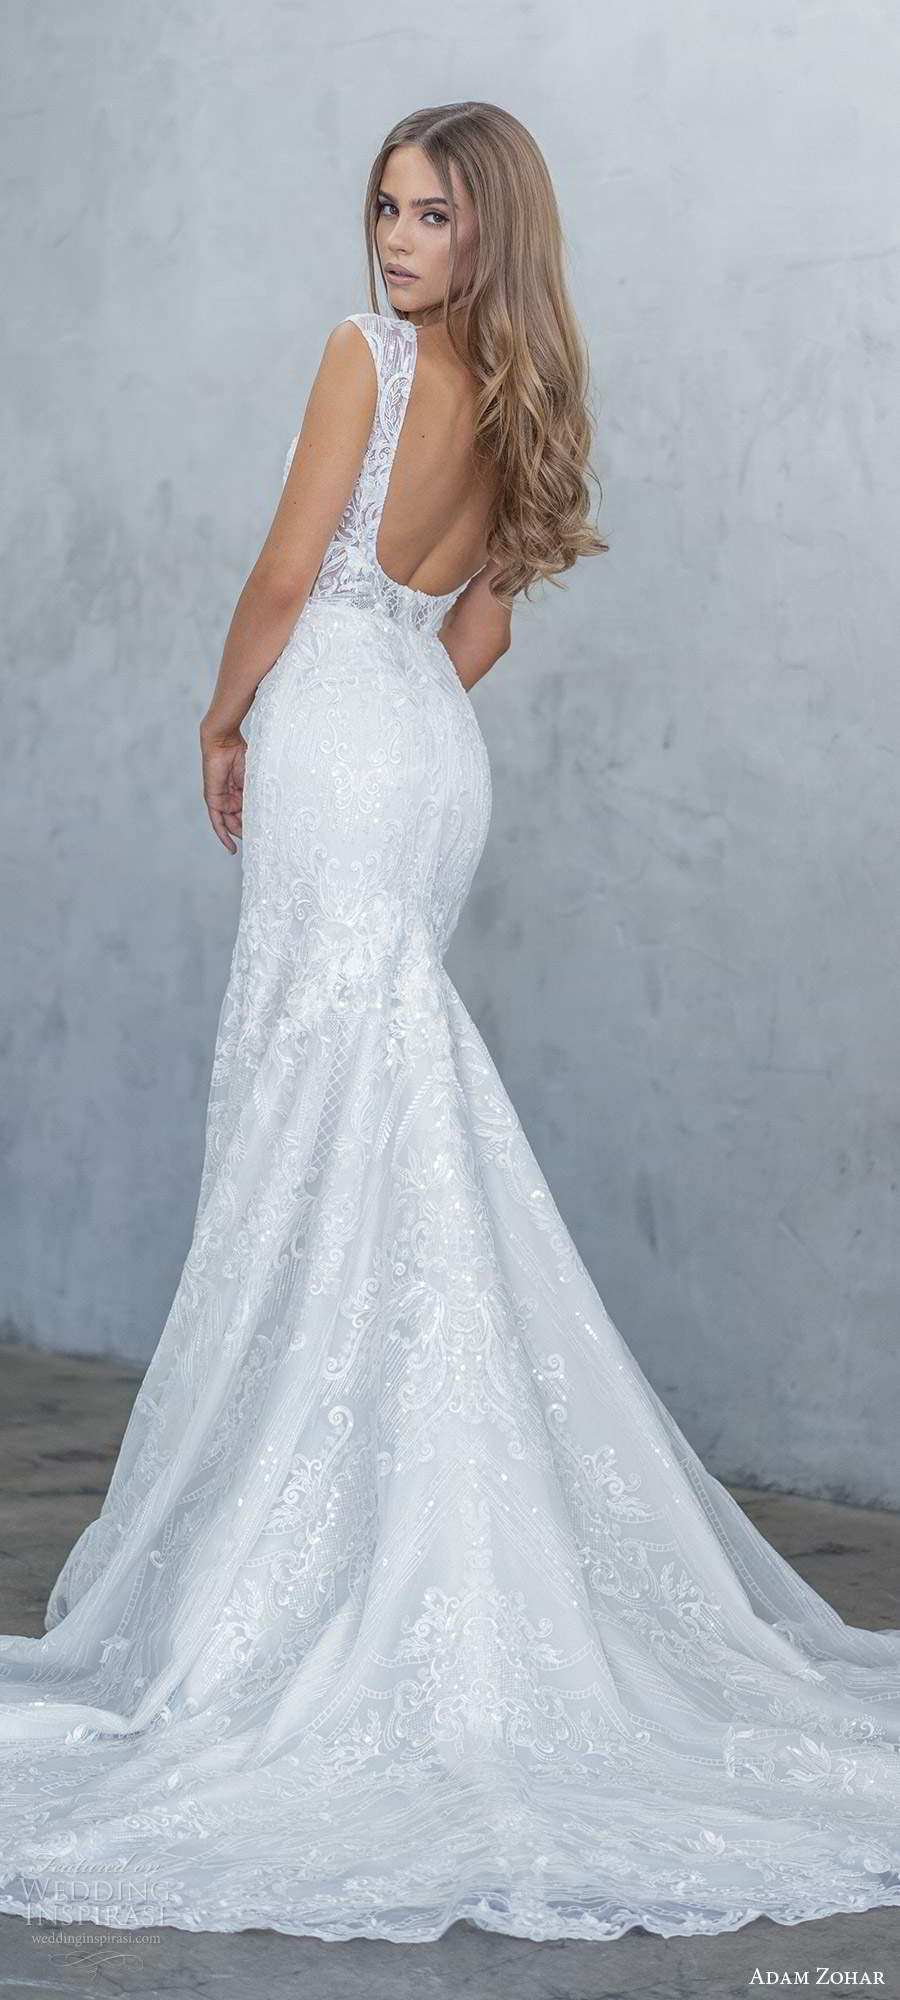 adam zohar fall 2020 bridal sleeveless straps plunging v neckline sheer bodice fully embellished lace fit flare mermaid wedding dress low back cathedral train (8) bv